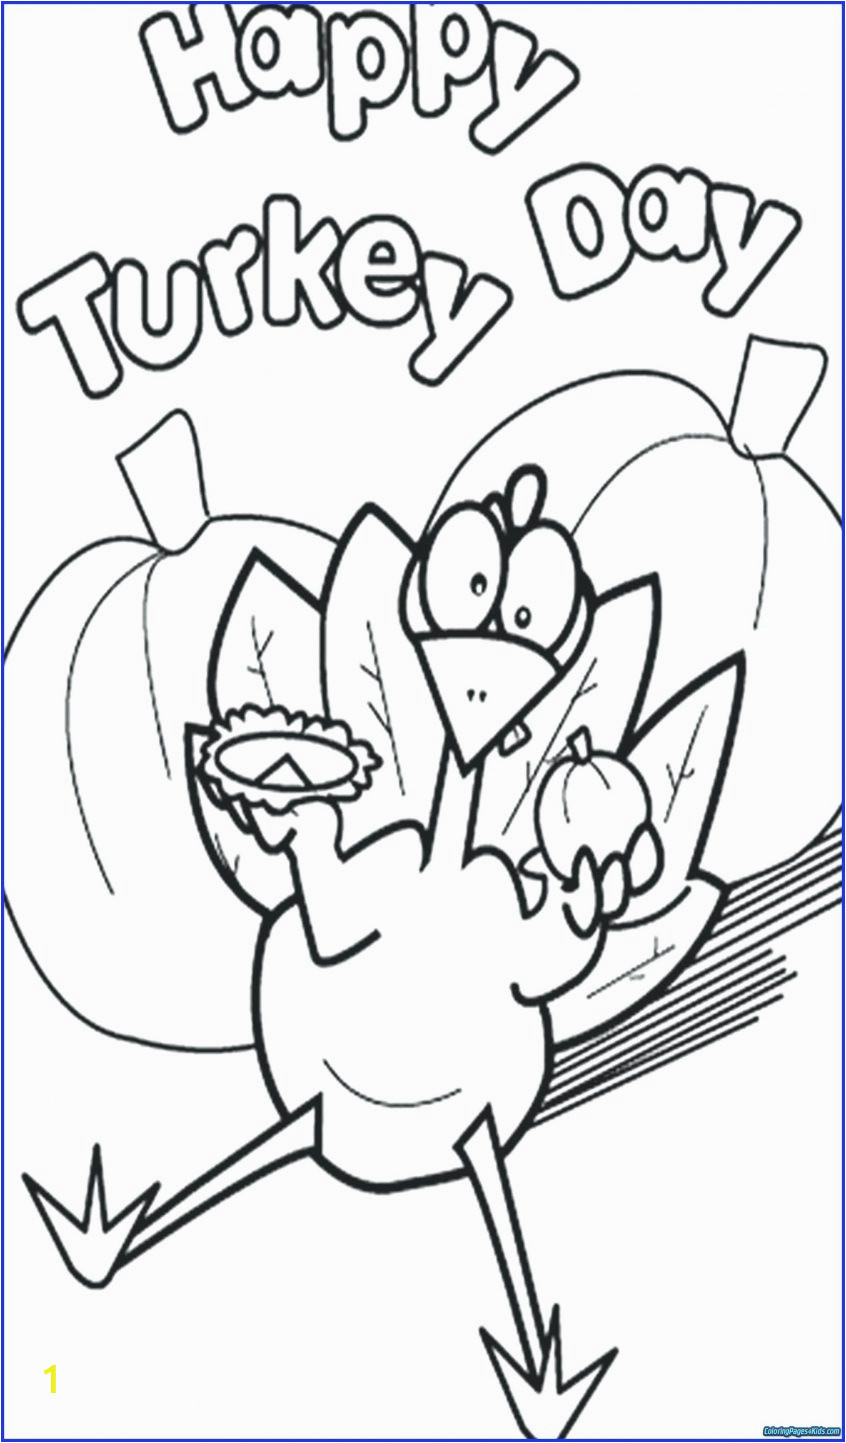 Preschool Turkey Coloring Pages top 51 Splendid Free Printable Thanksgiving Coloring Sheets